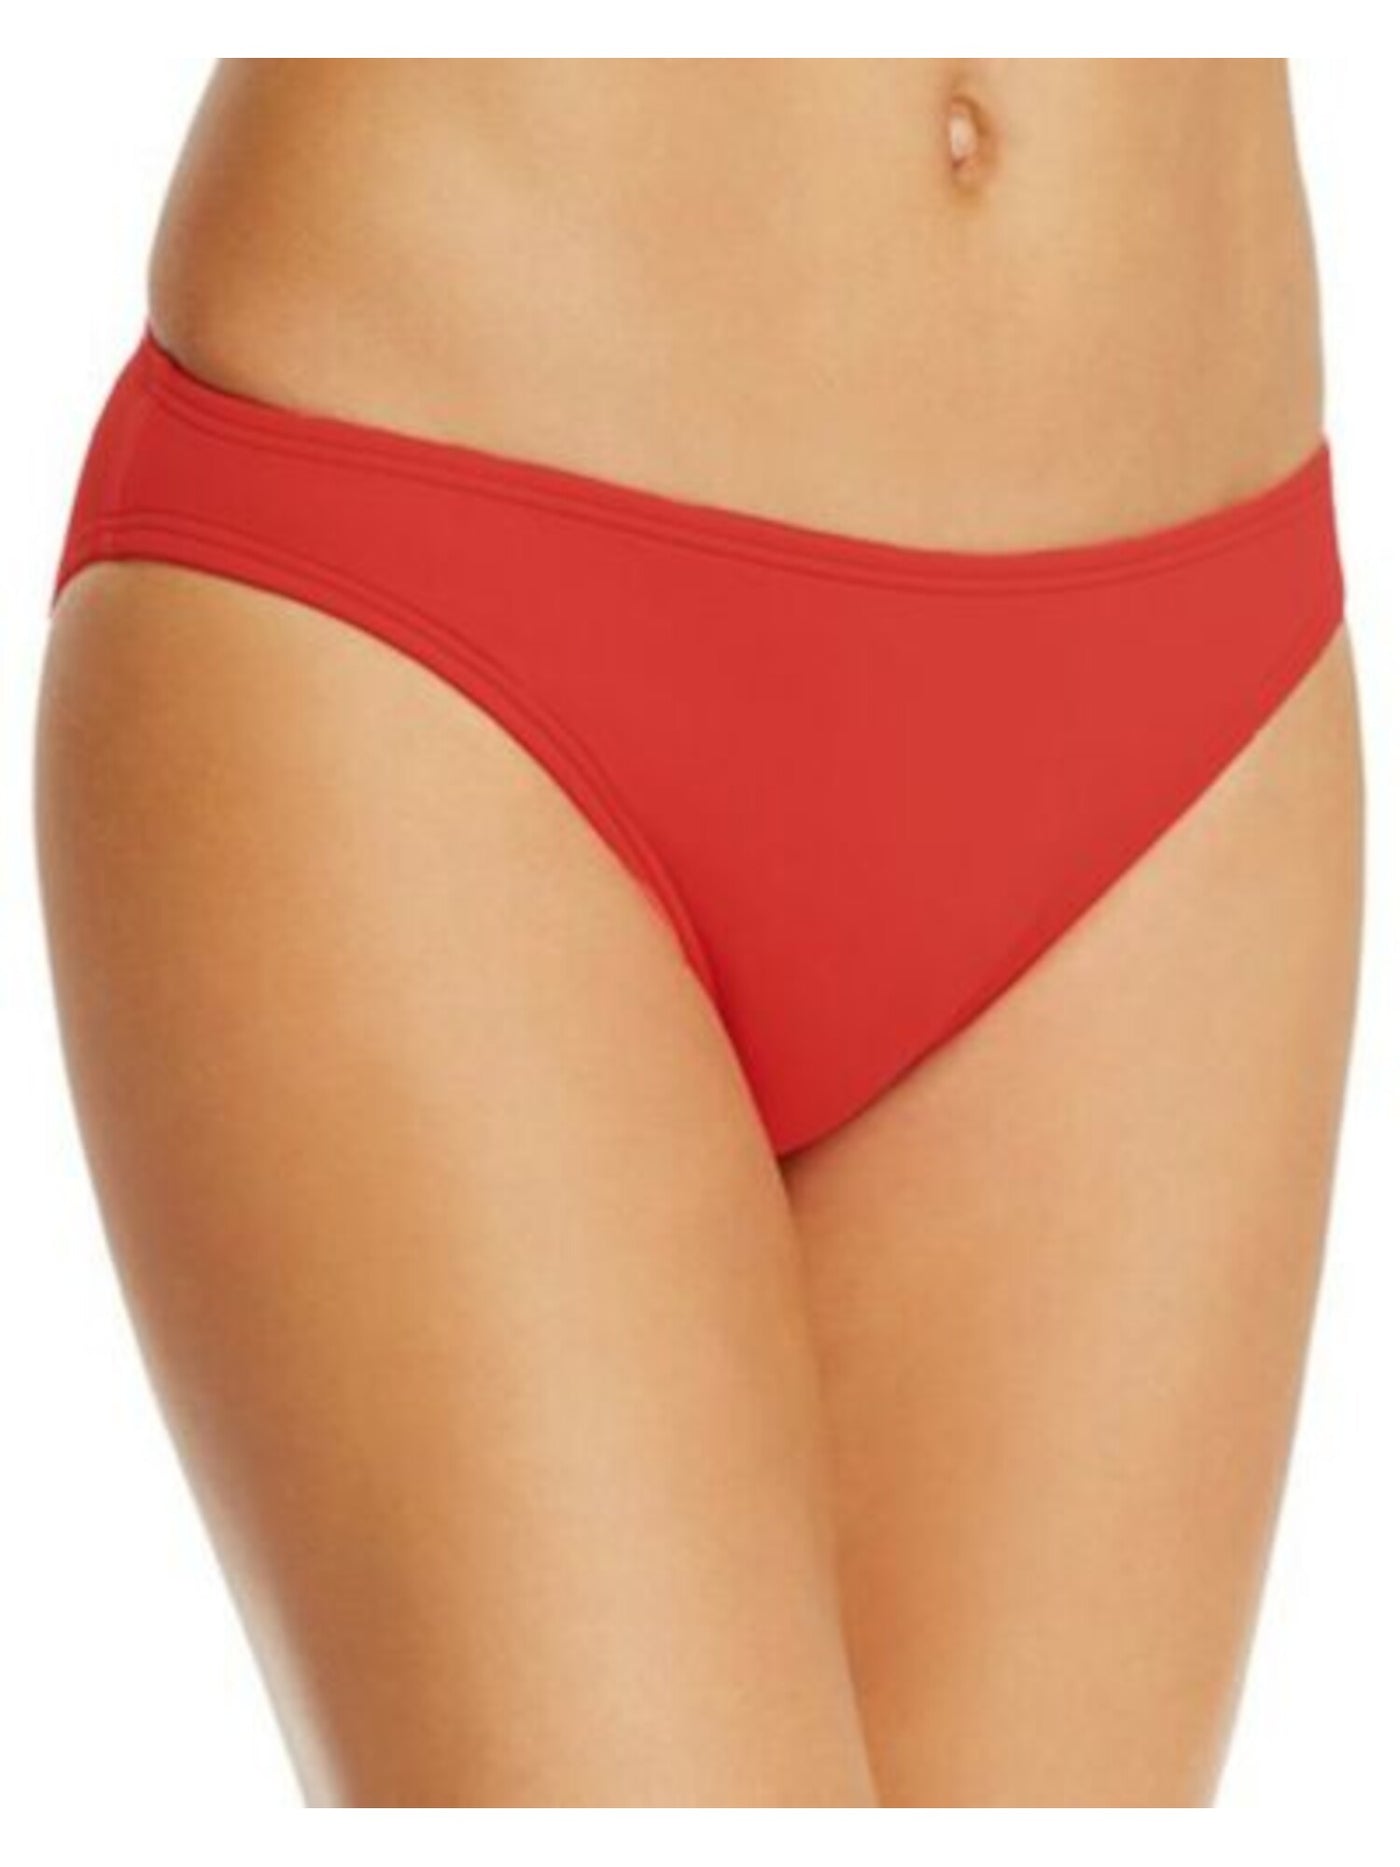 DKNY Women's Red Stretch Lined Bikini Full Coverage UV Protection Hipster Swimsuit Bottom XL